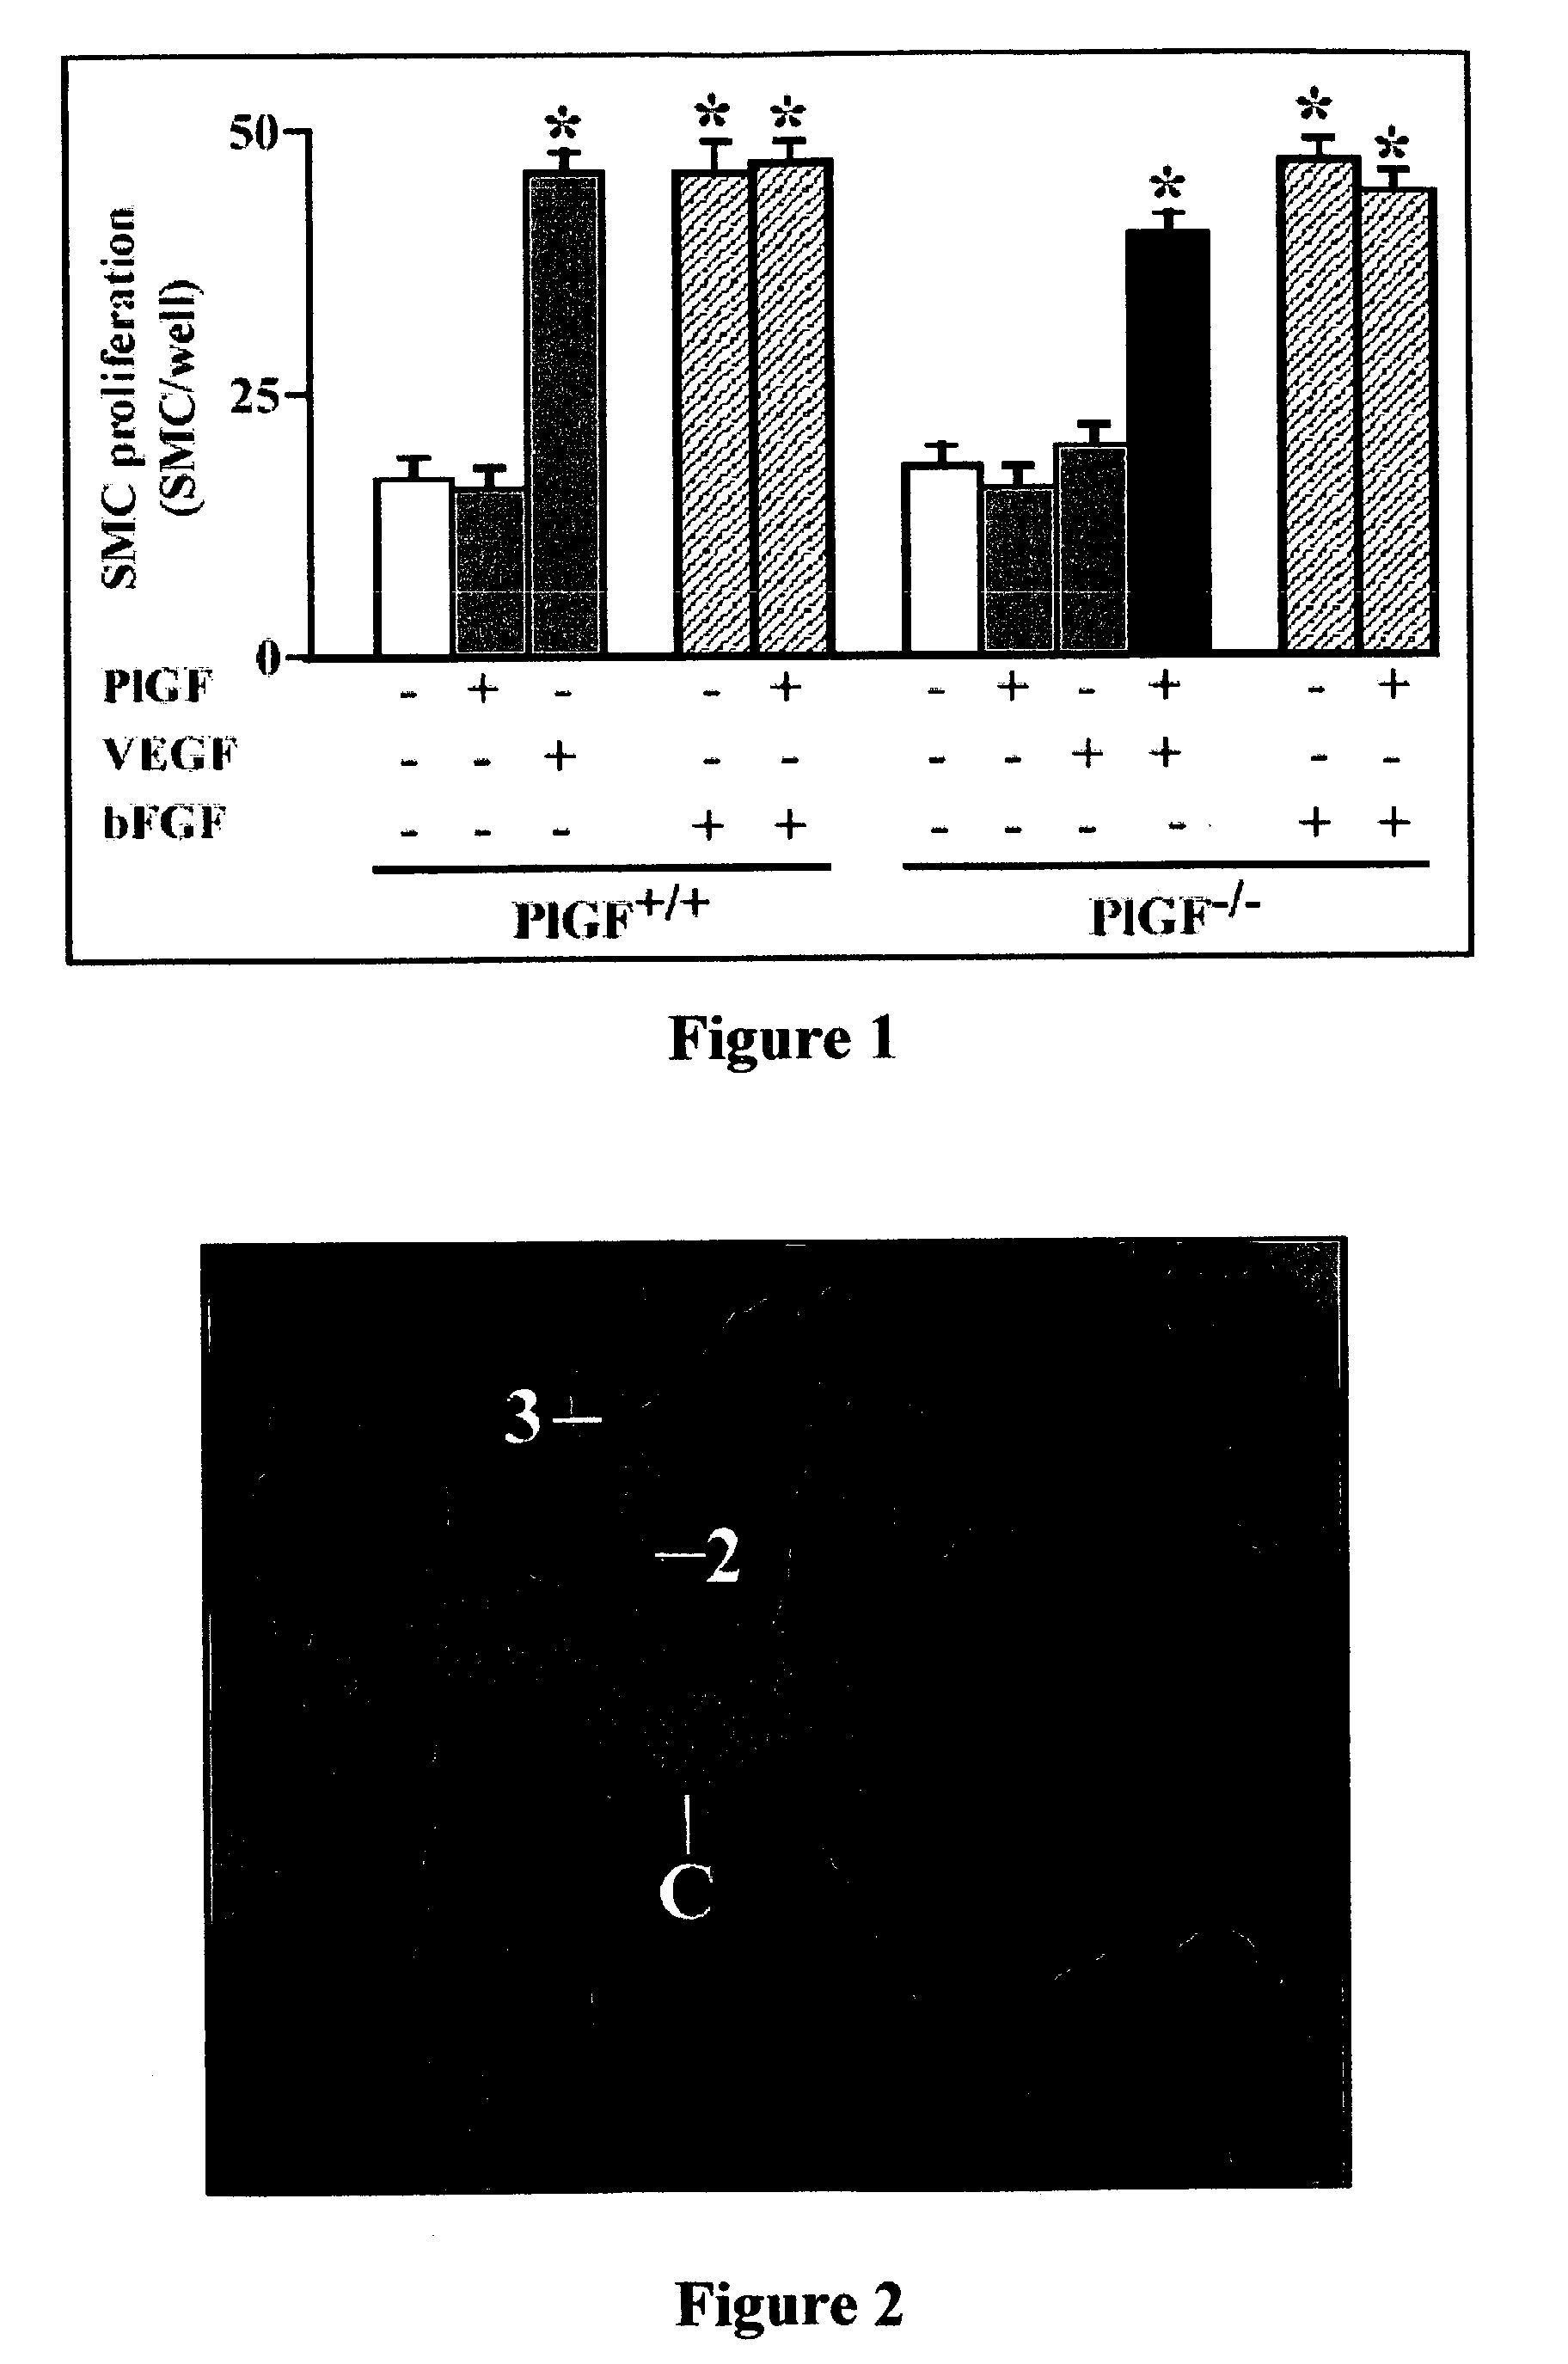 Method of improving ischemic muscle function by administering placental growth factor